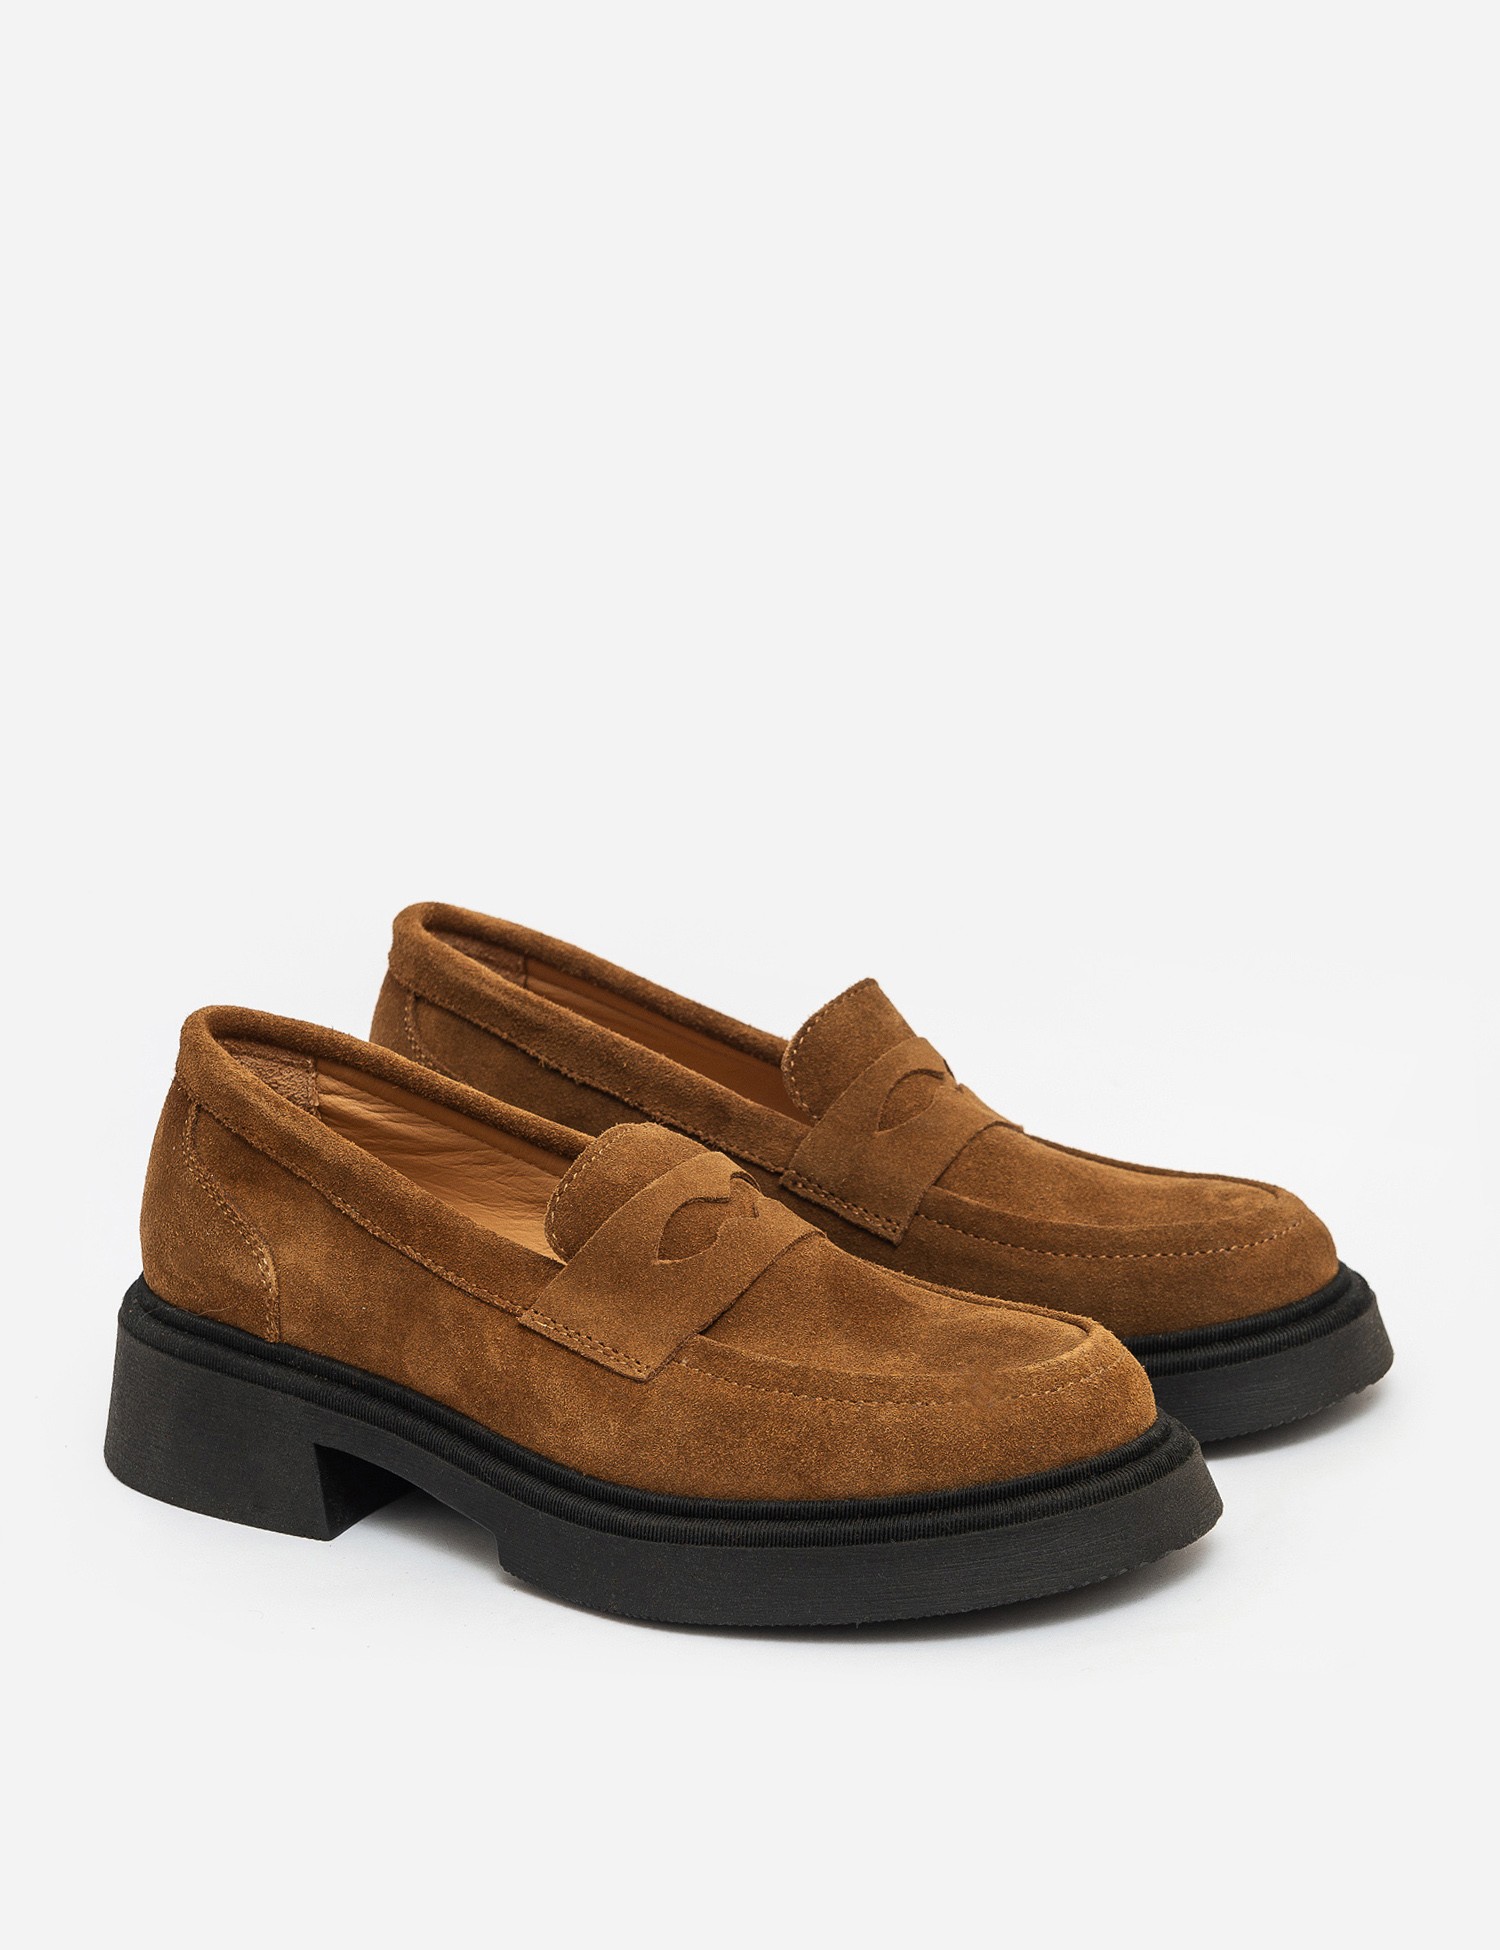 Handcrafted Suede Women's Loafer